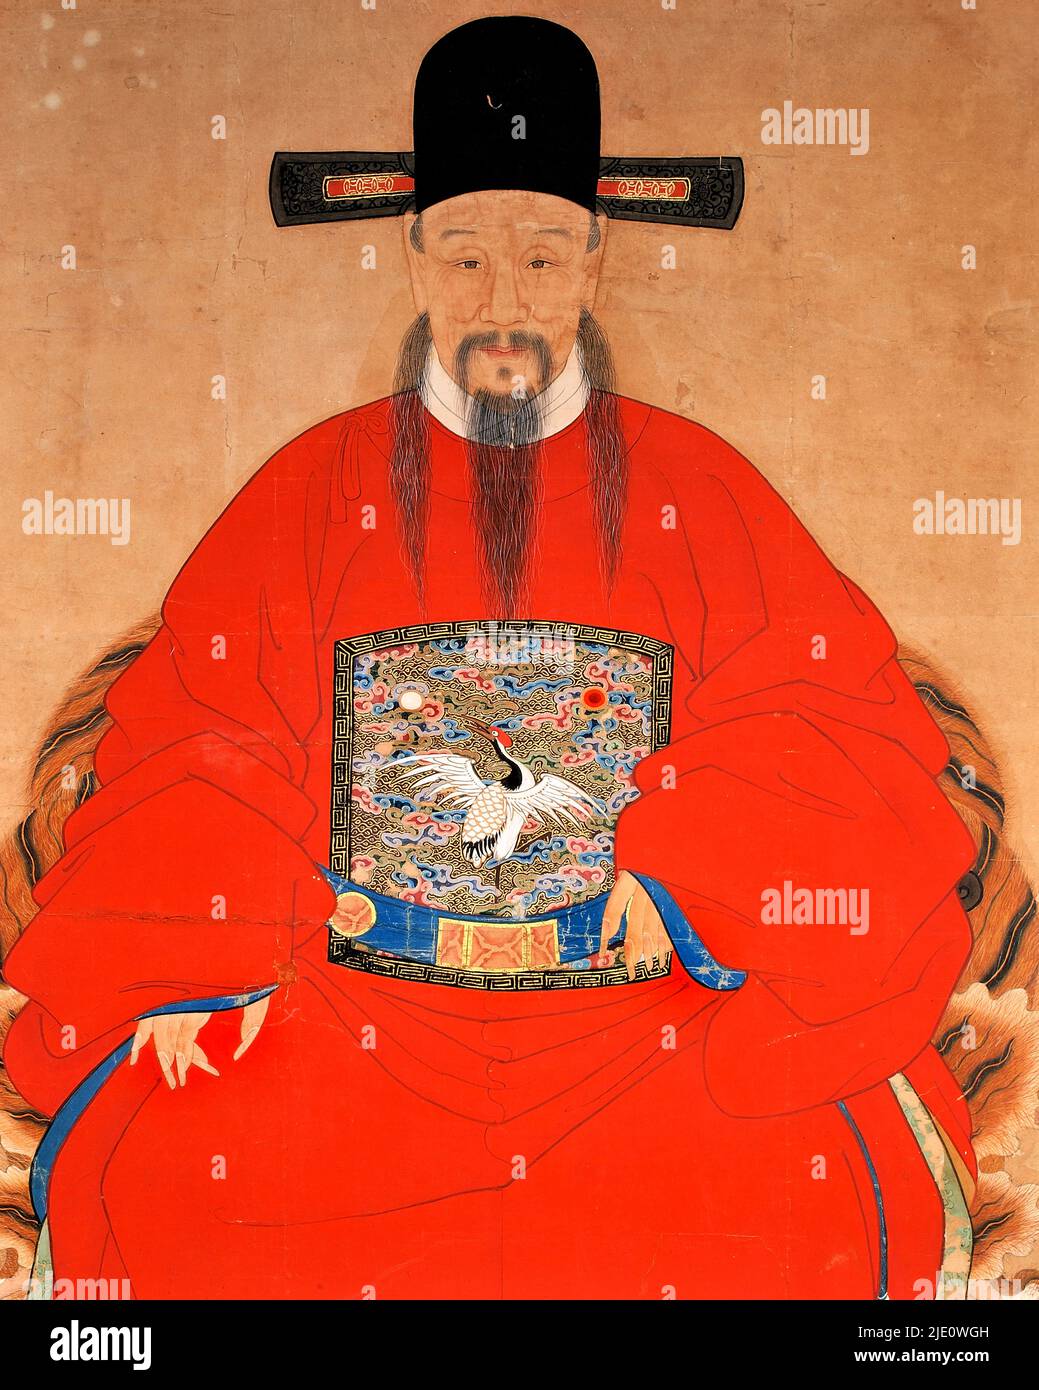 Ancient Chinese painting, portrait of a Chinese dignitary, tempera on canvas, Qing period 1644-1911. Stock Photo